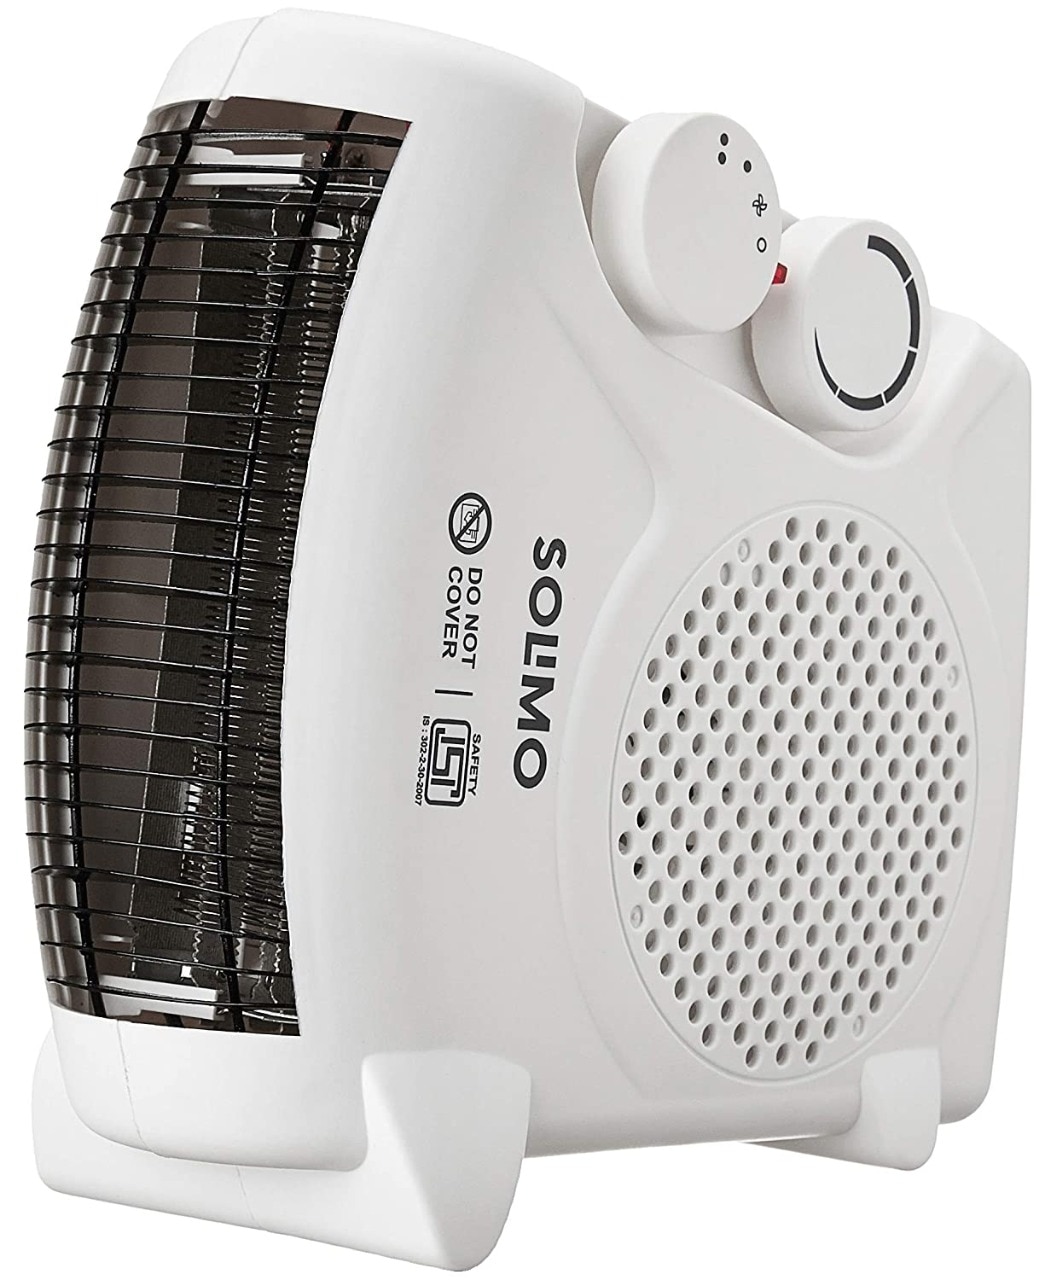 Amazon Festival Sale: Buy Top 5 Safe Room Heaters For Sale At Amazon For Thousand Rupees